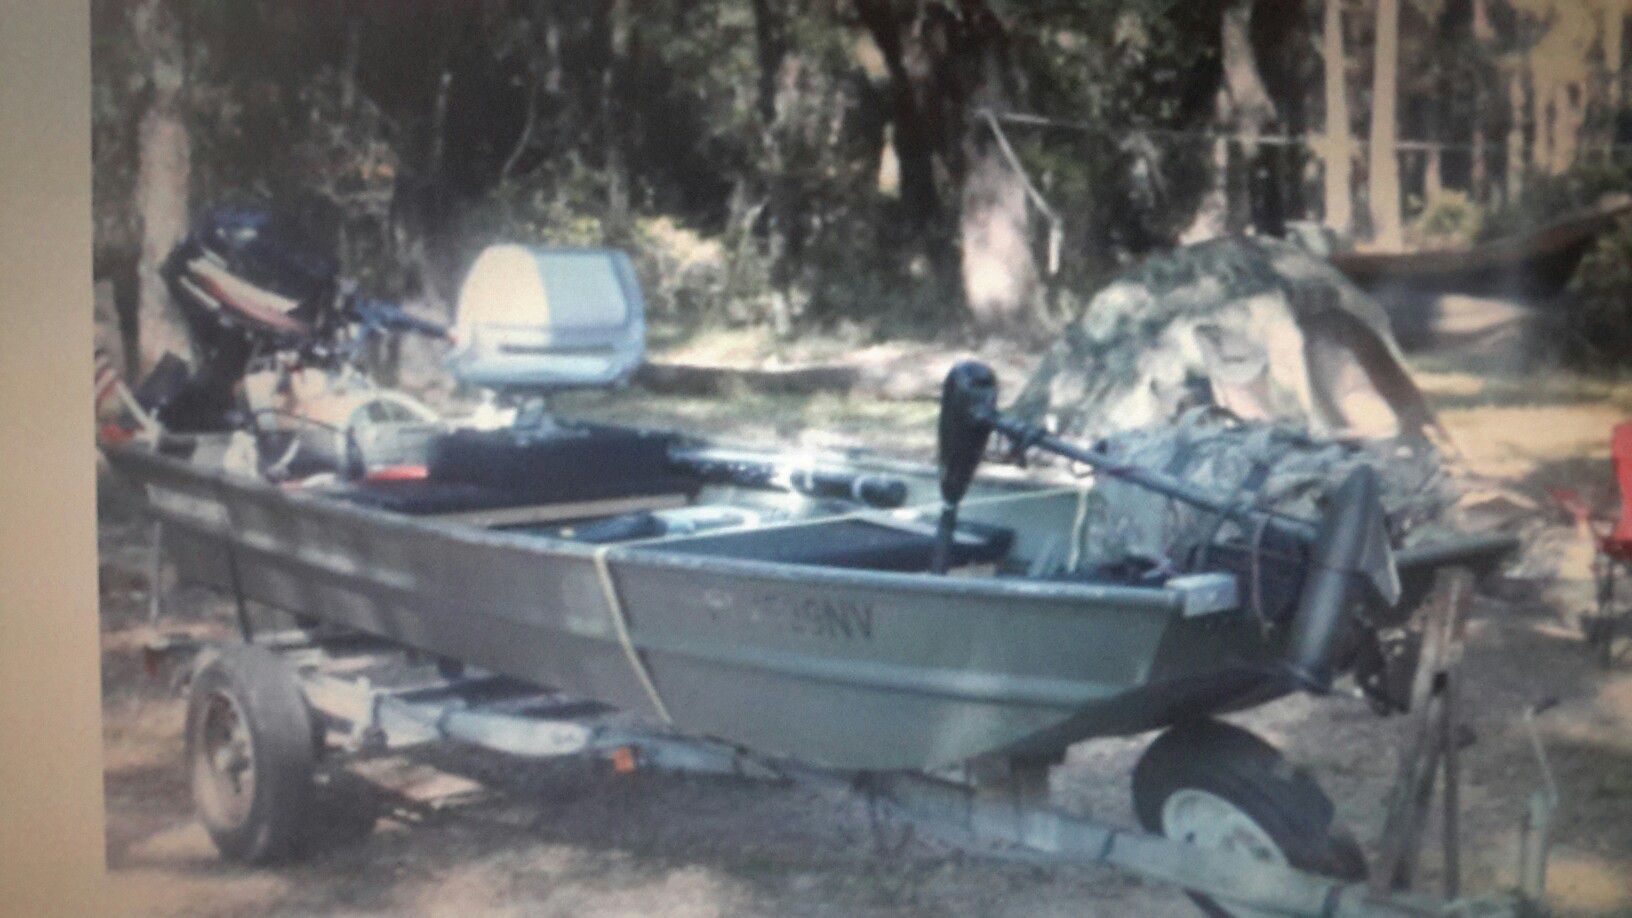 Jon boat 16 ft with A 50 Thrust Trolling Motor 